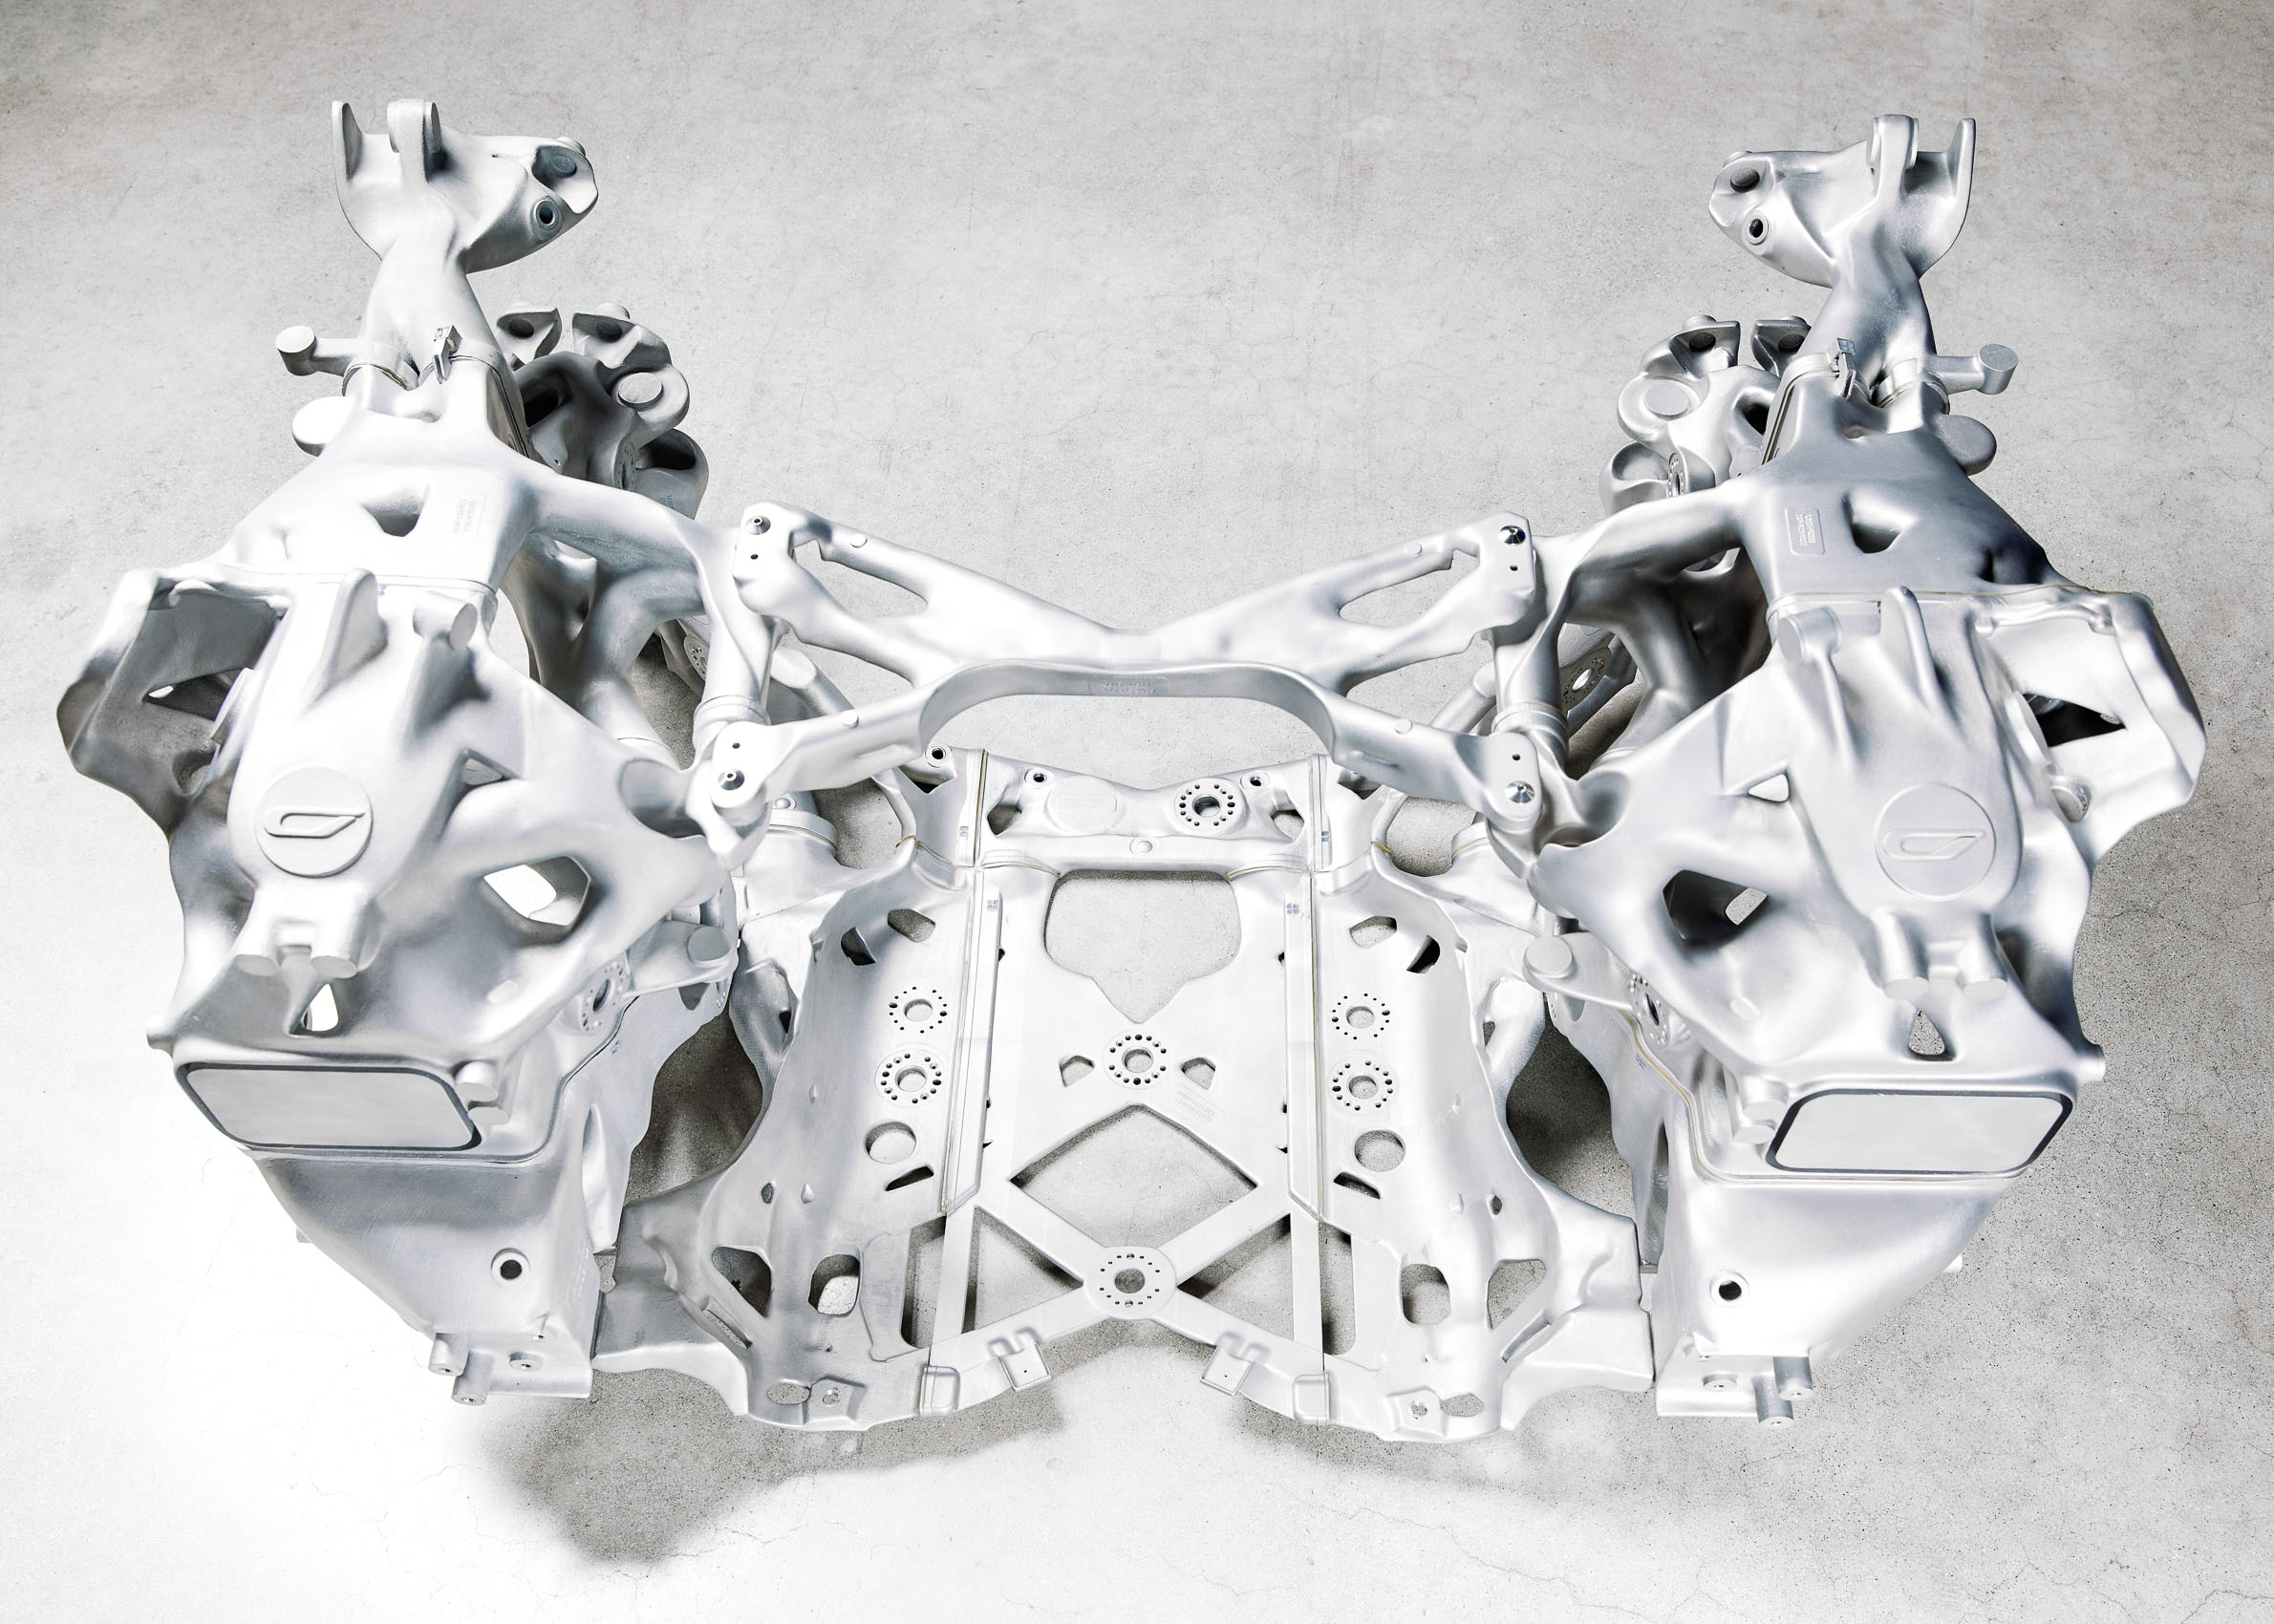 3D printed chassis of of the 21C Hypercar | Los Angeles | Editorial and Commercial Photographer Patrick Strattner